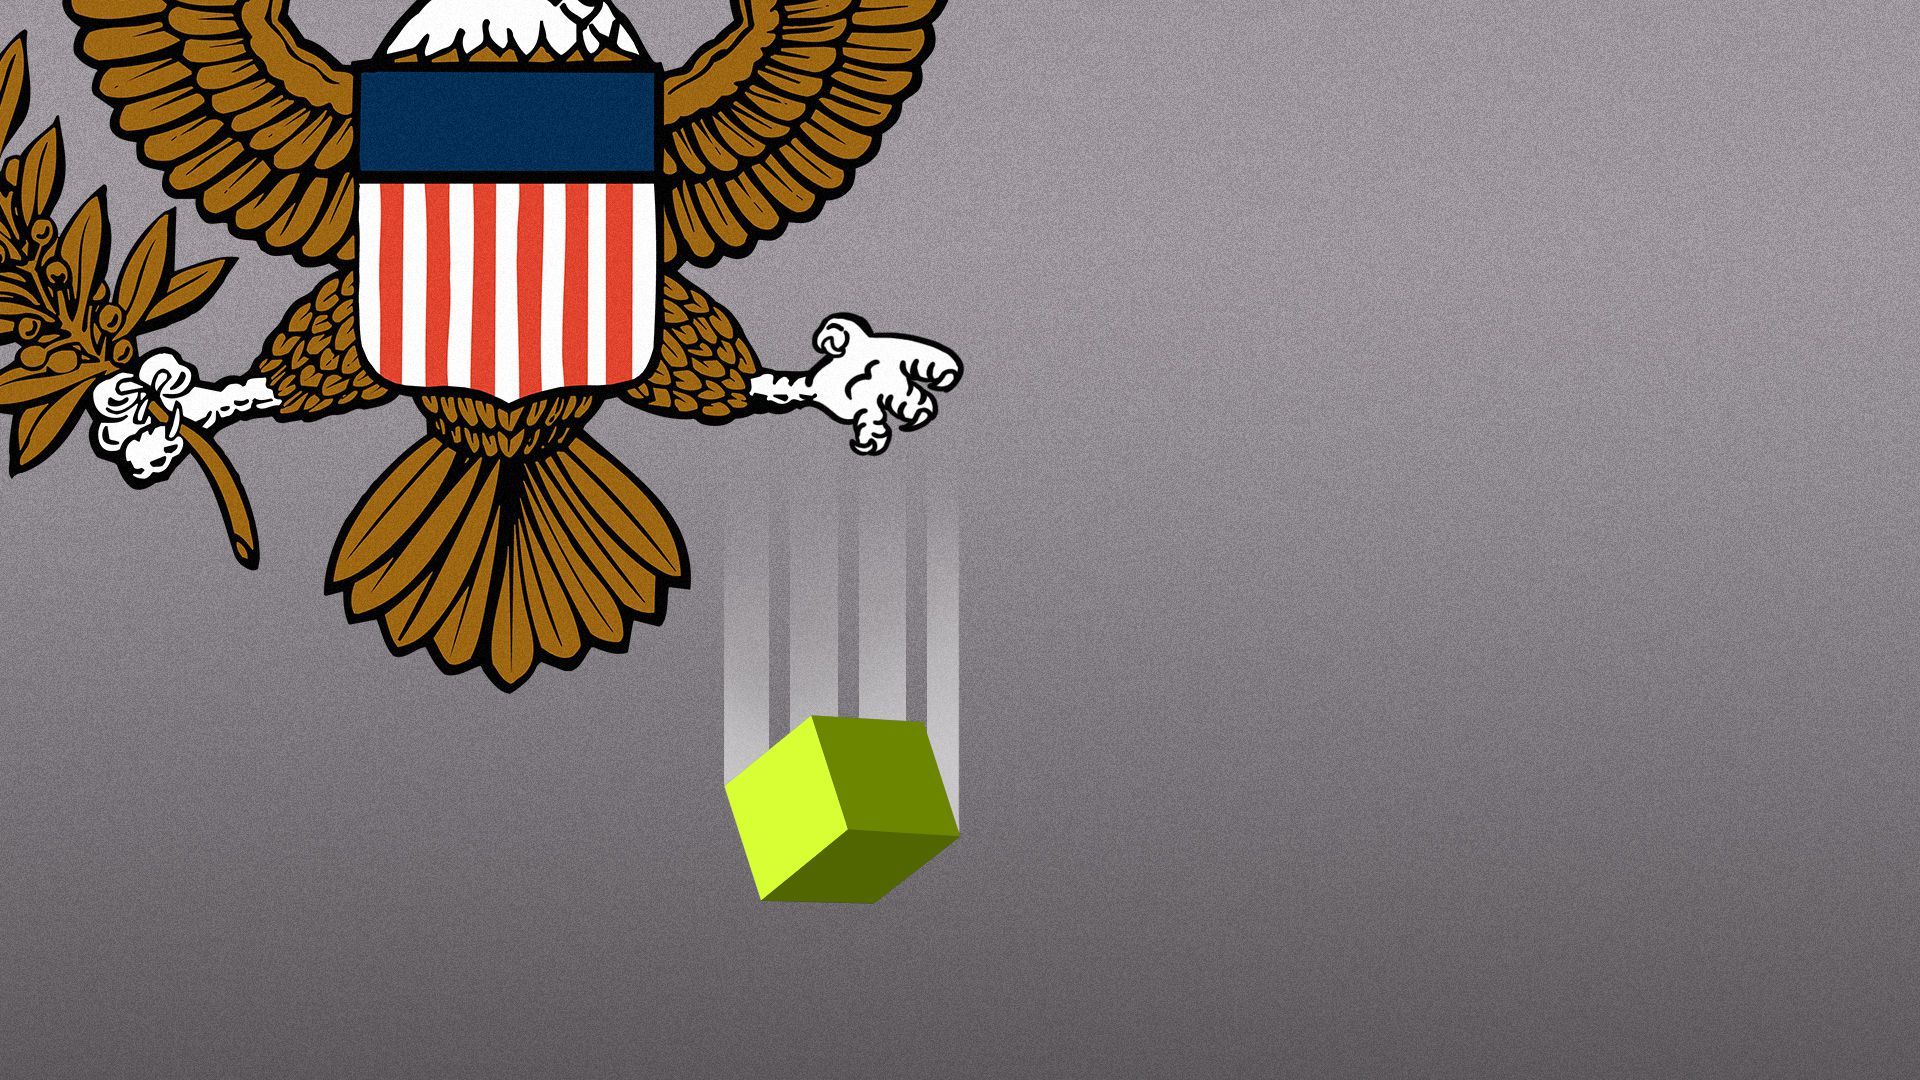 Illustration of the SEC logo eagle dropping a green cube.